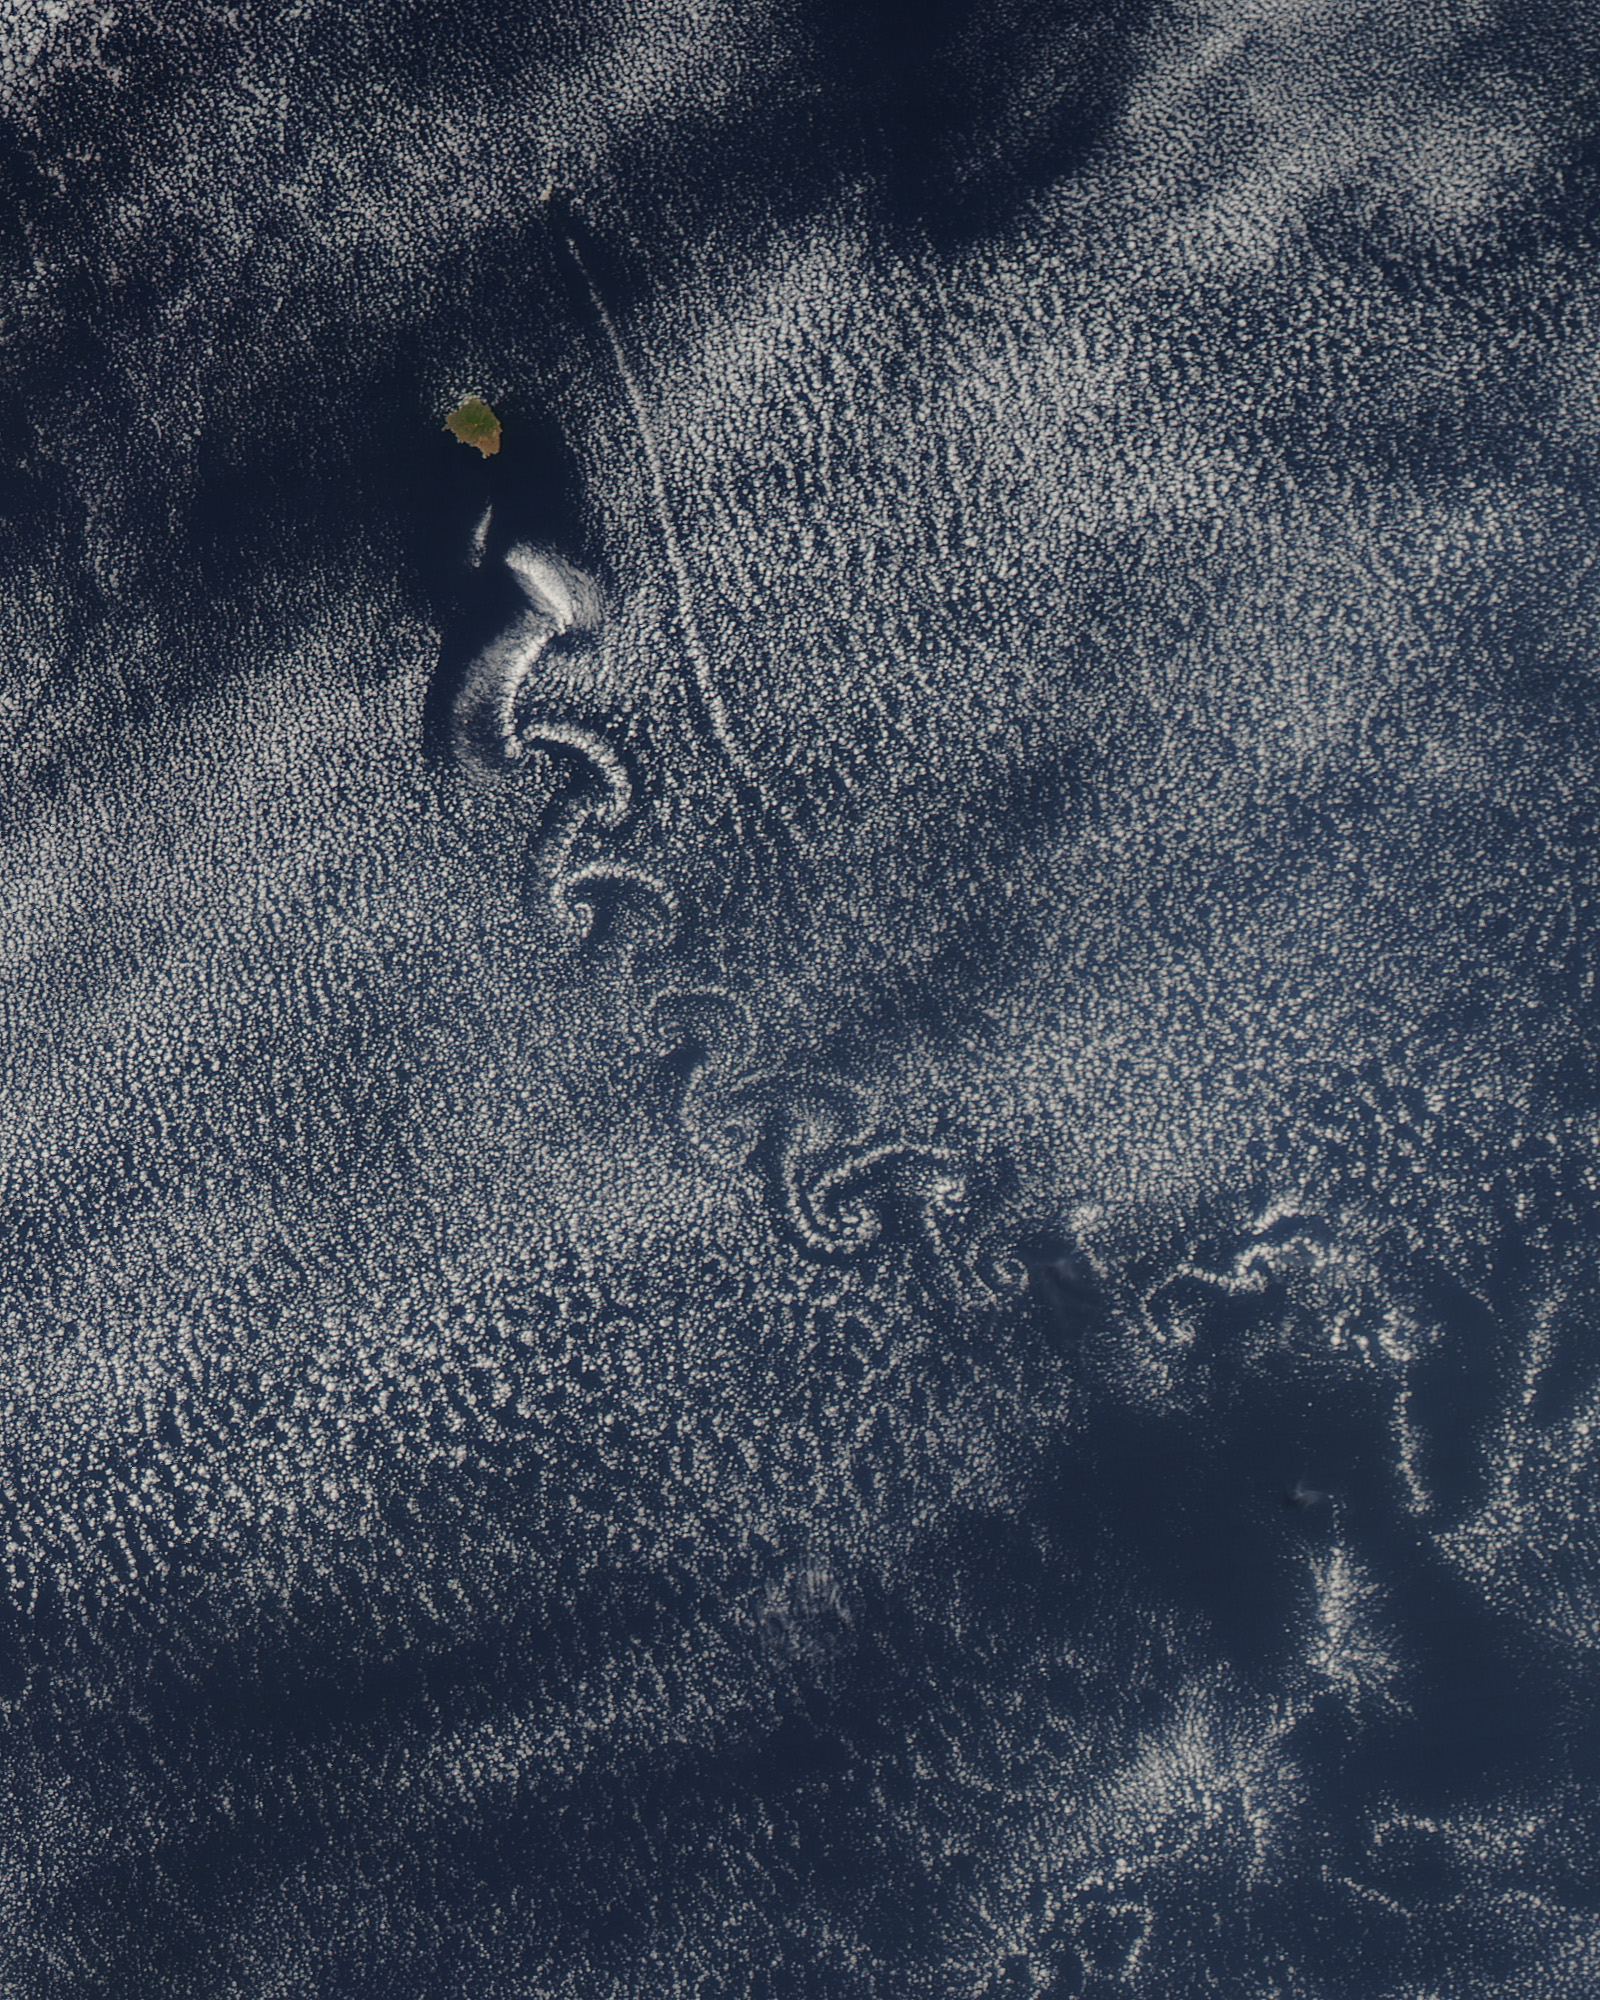 These Trippy Spirals Are An Island’s Atmospheric Exhaust